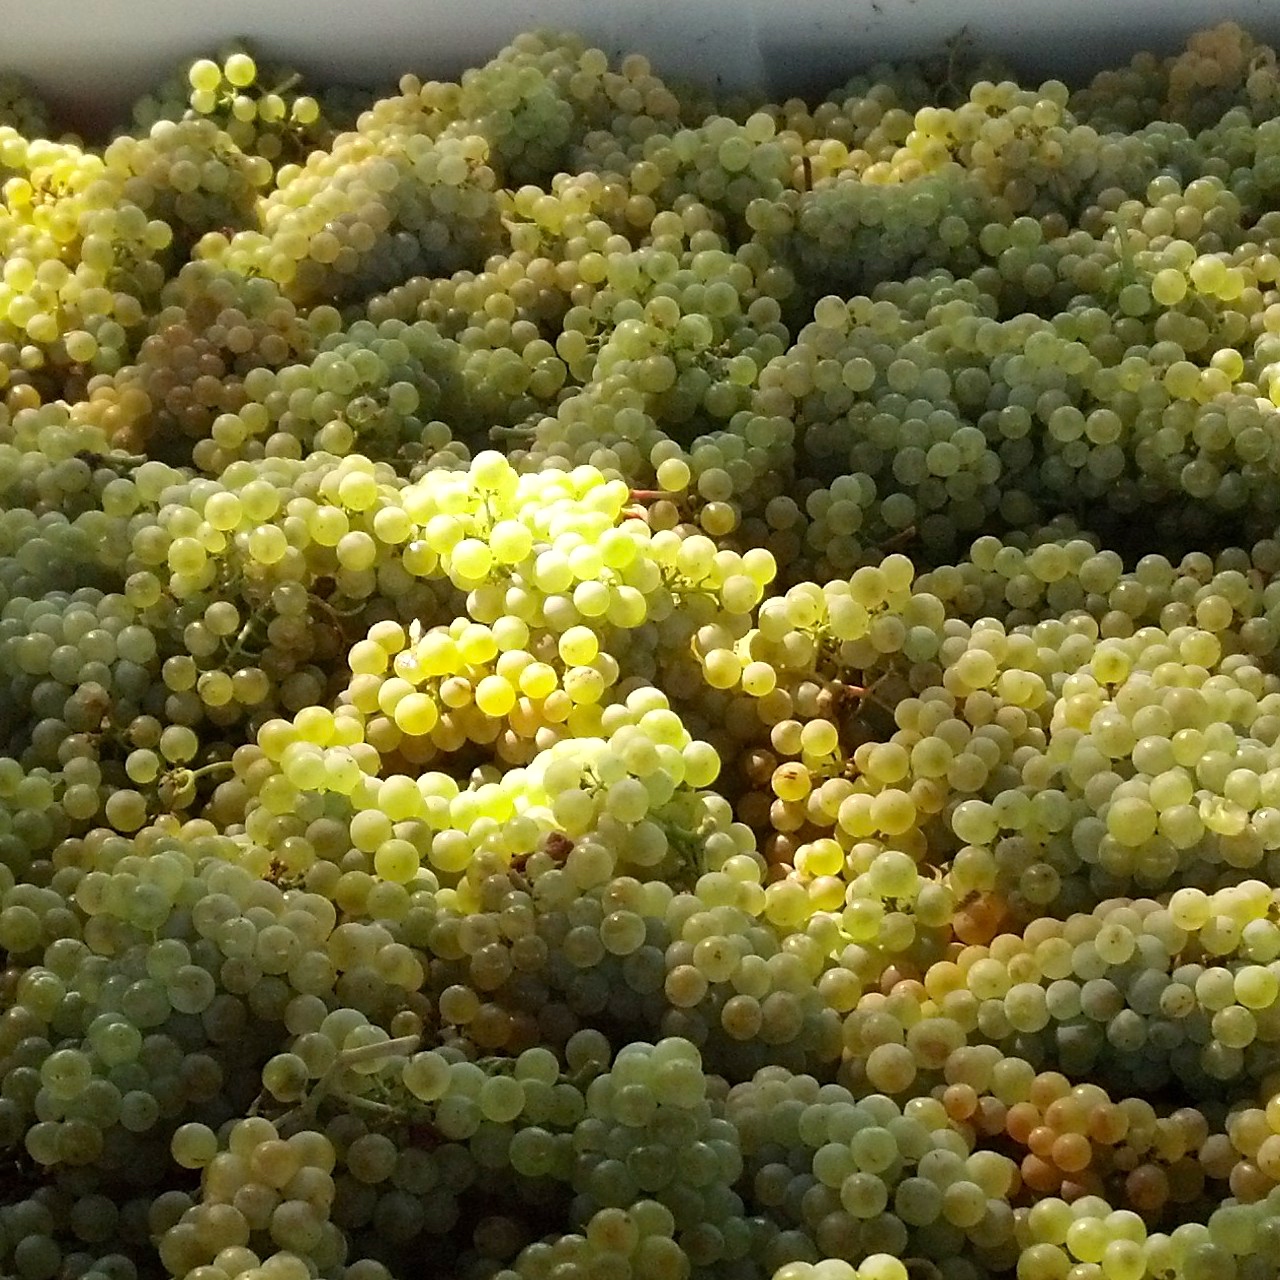 Bunches of picked white wine grapes waiting to be crushed